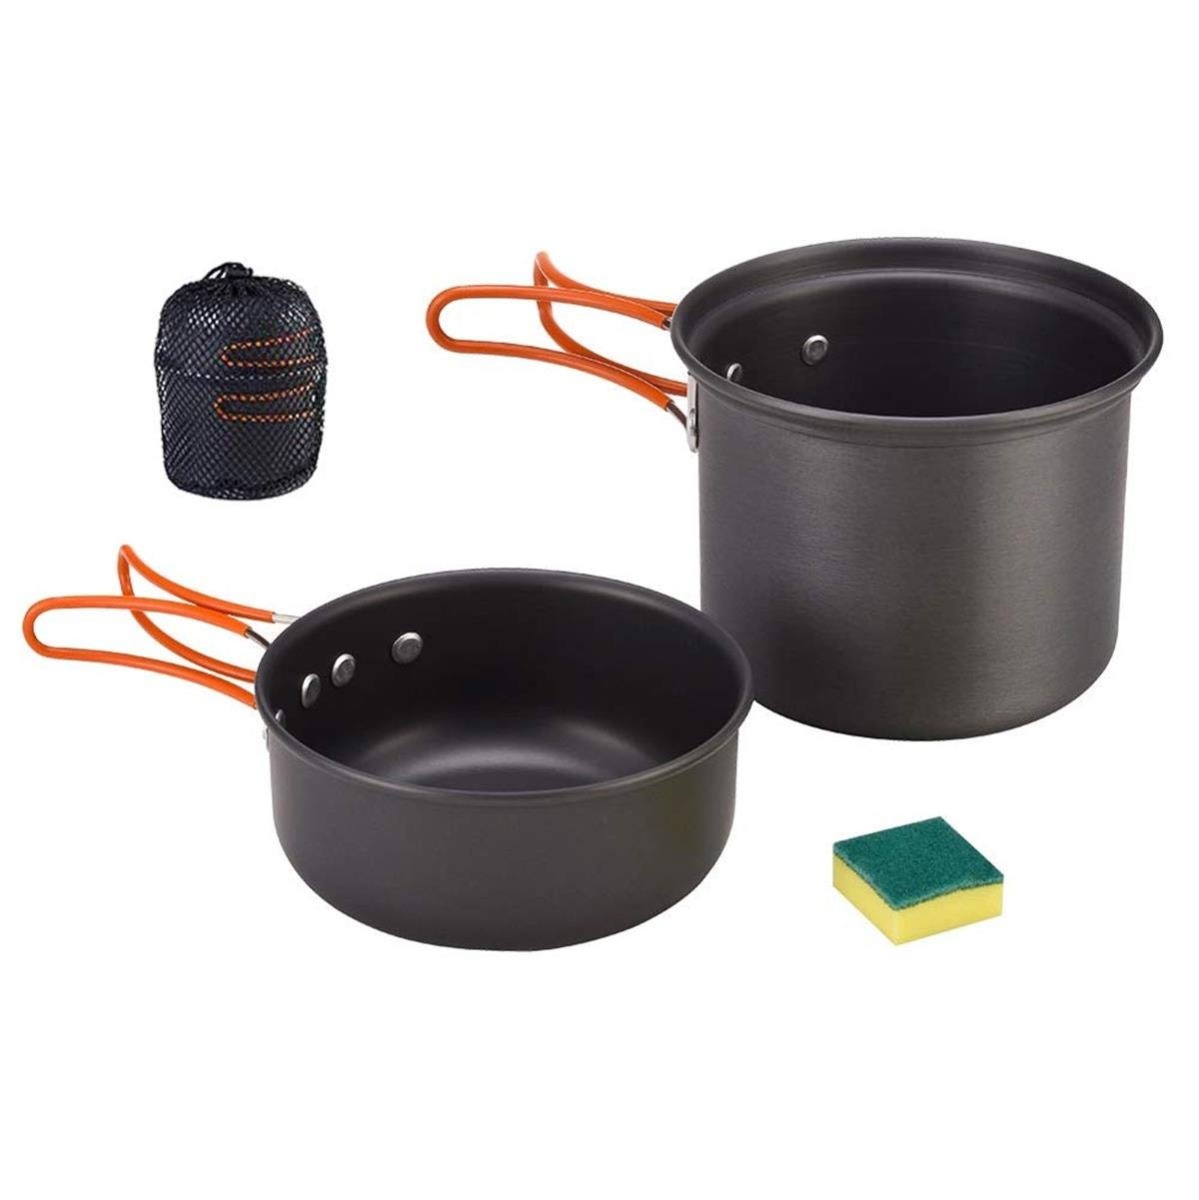 CretFine 304 Stainless Steel Camping Cookware Set with Portable Bag - -  CretFine - Home & Outdoor